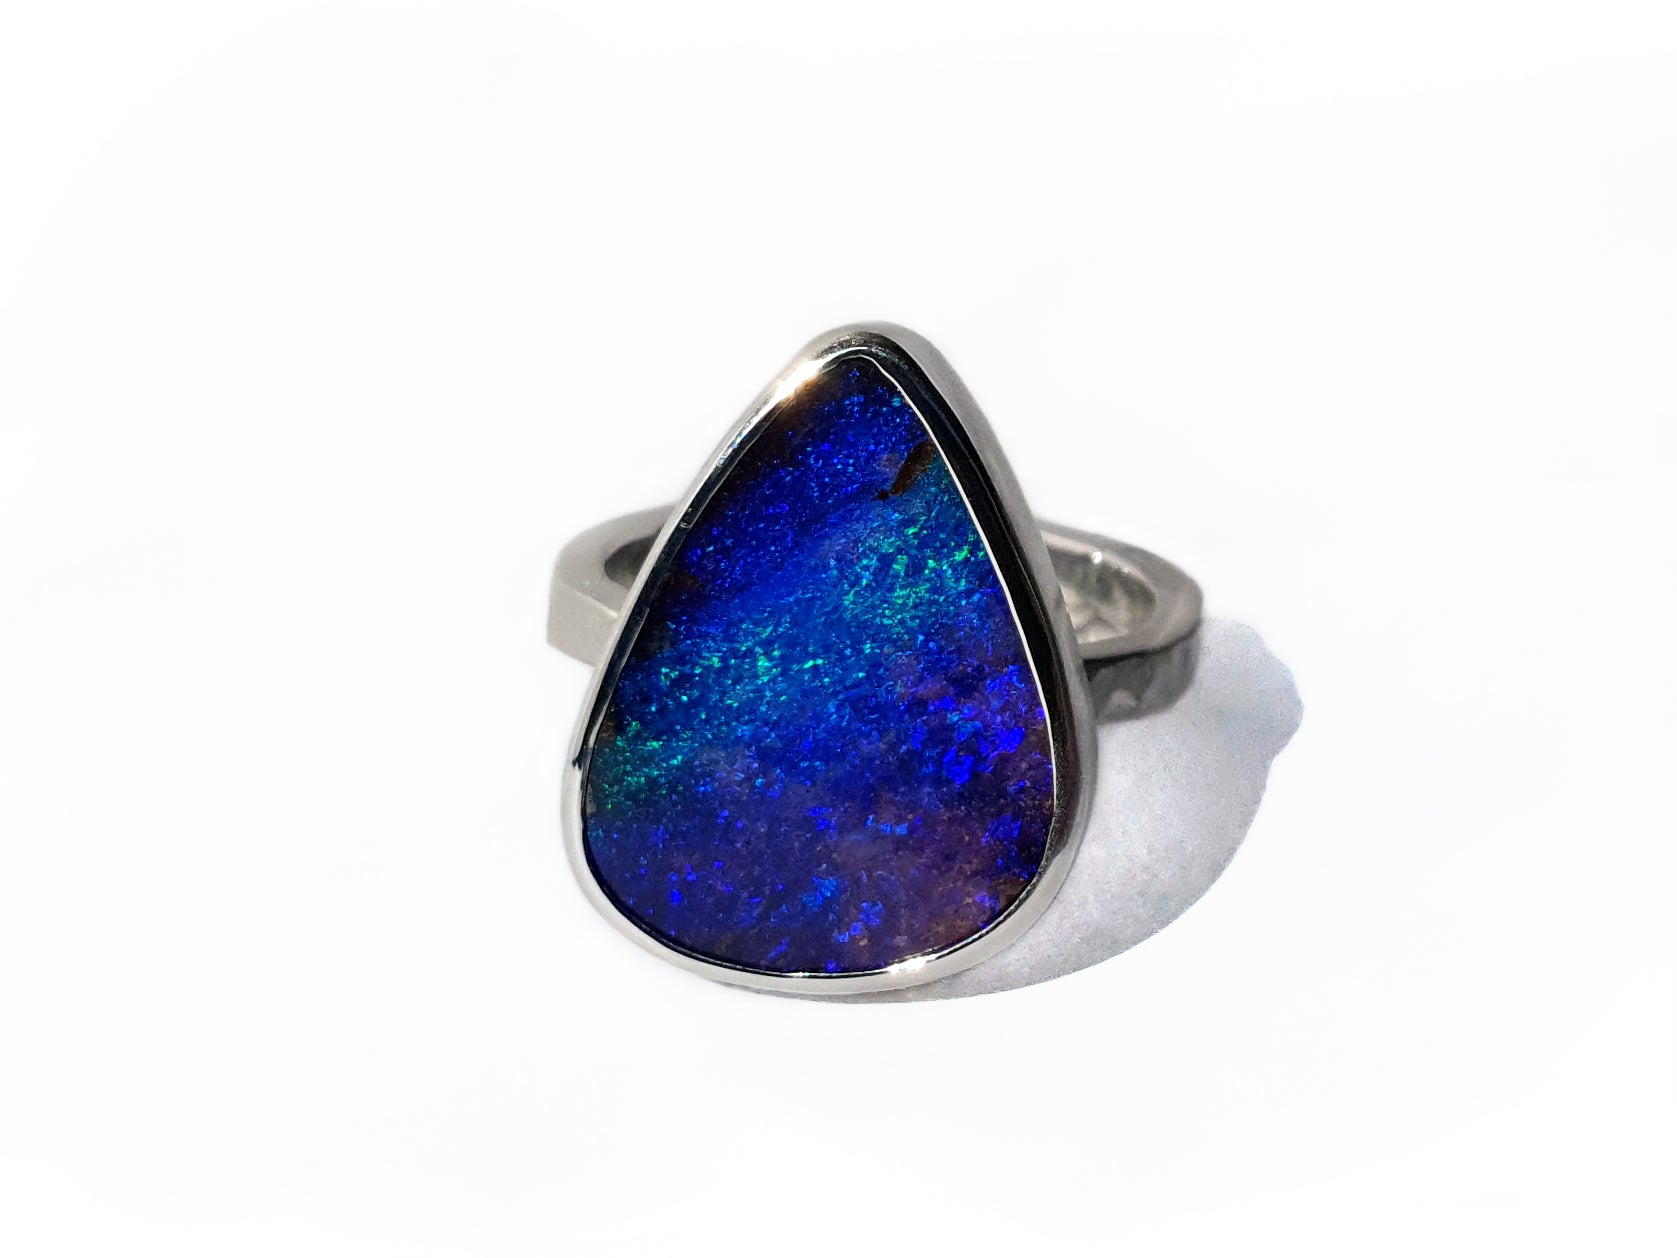 Blue and purple Queensland Boulder Opal set in Silver band. This ring is handcrafted using ethically sourced materials in our Brisbane studio.